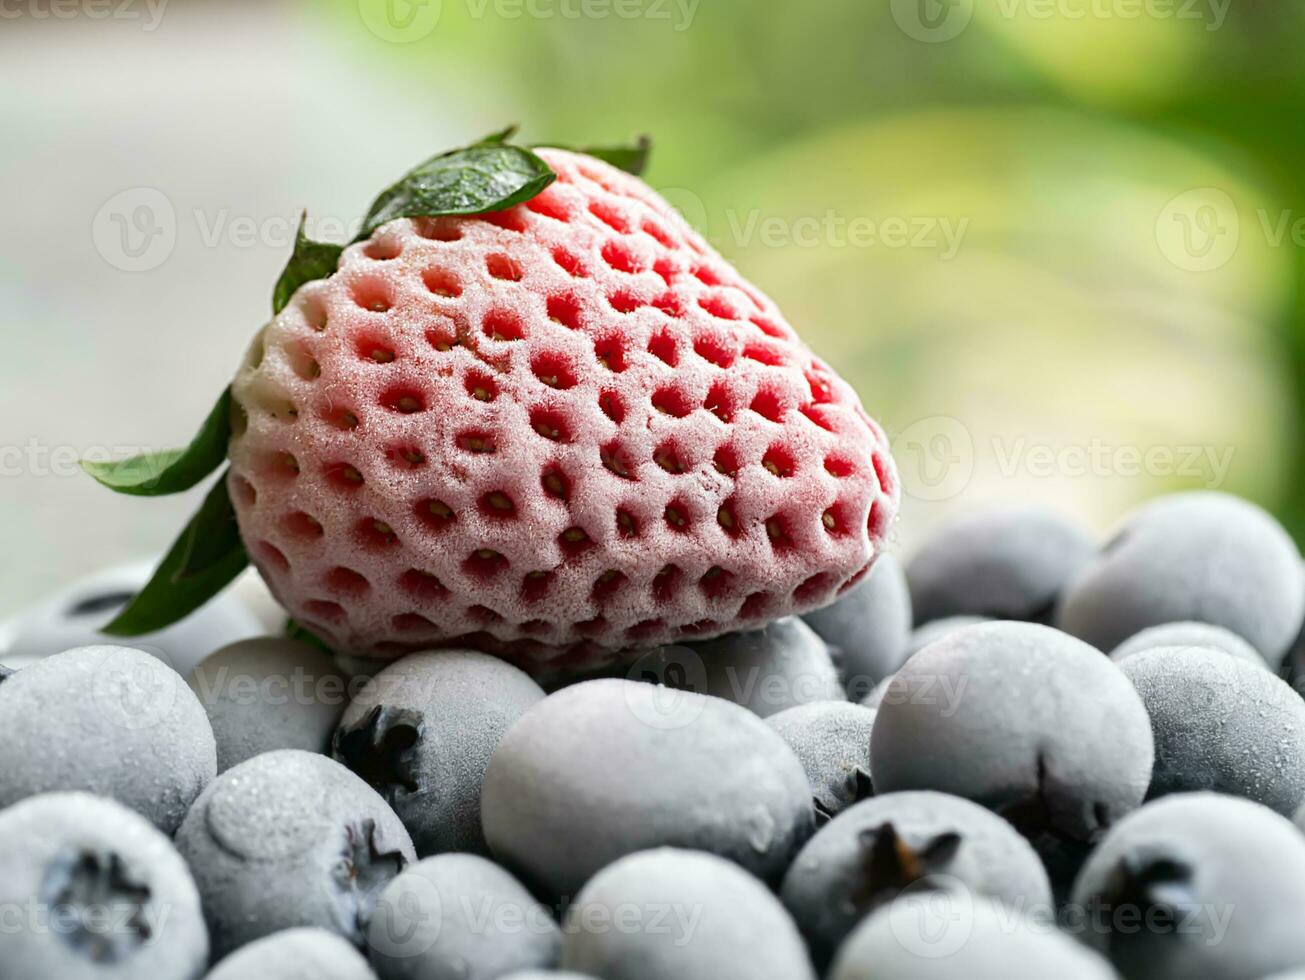 Freeze of Strawberry and Blueberry photo